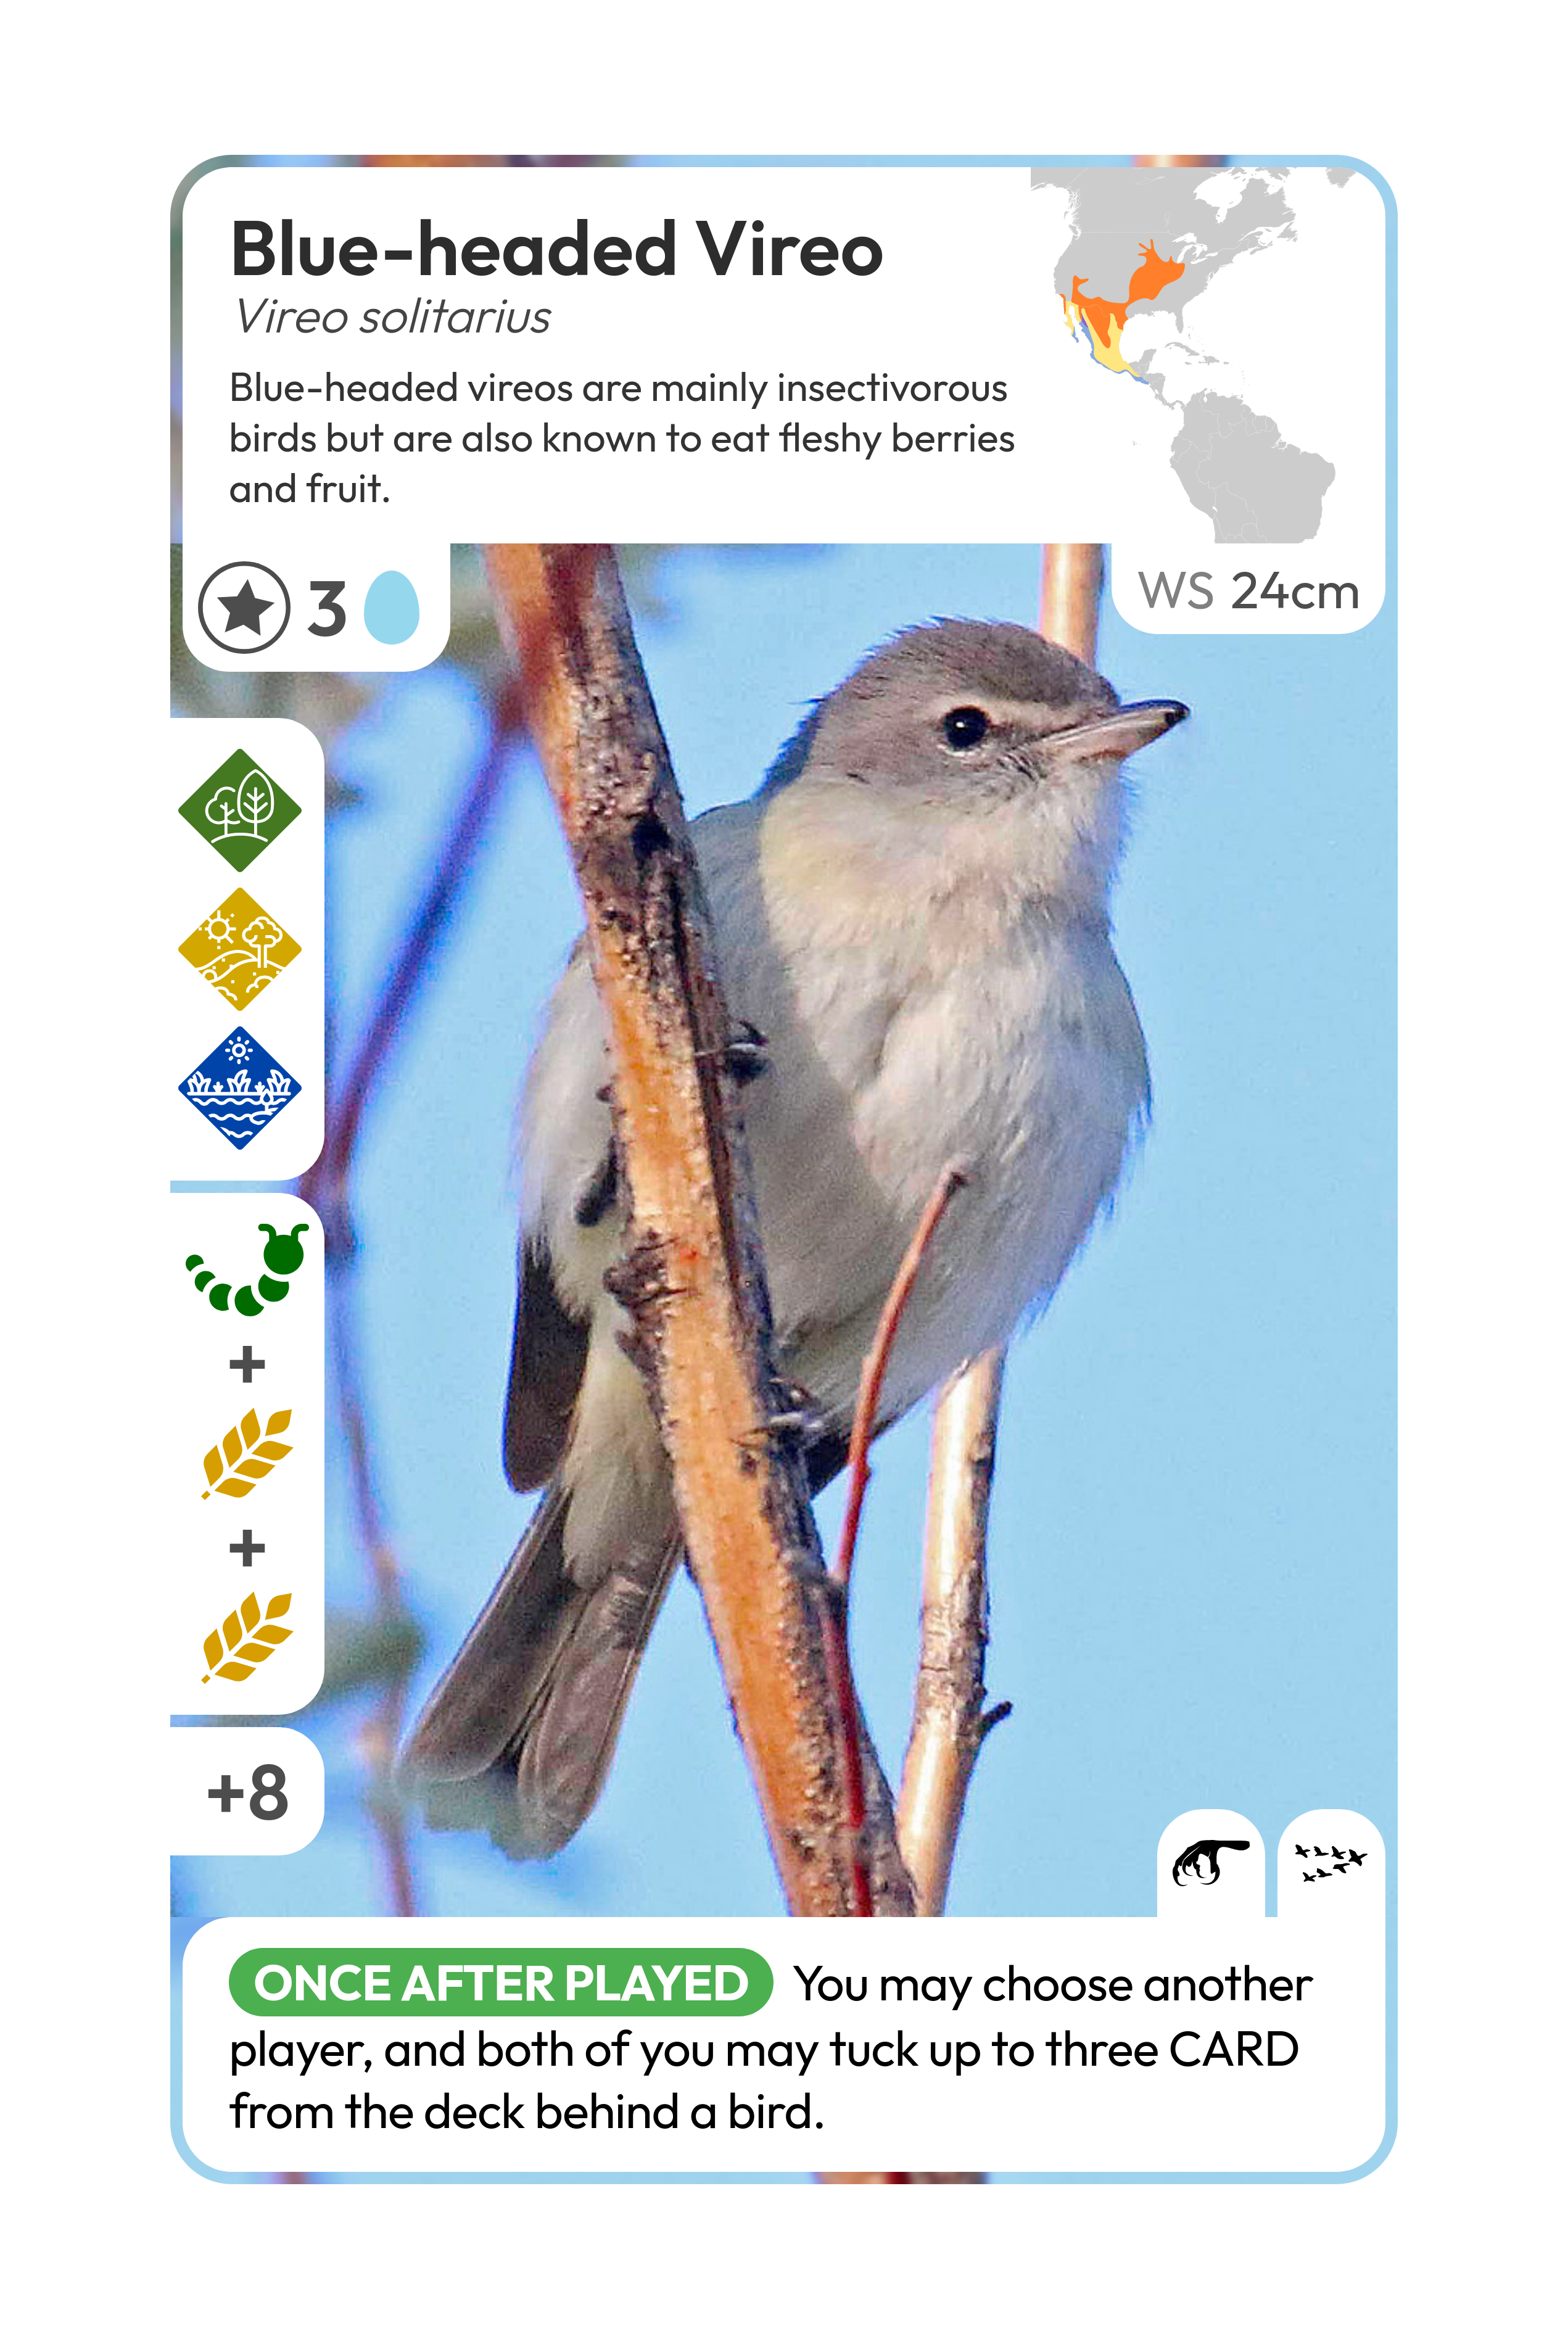 A card of a Blue-headed Vireo, generated by my code.